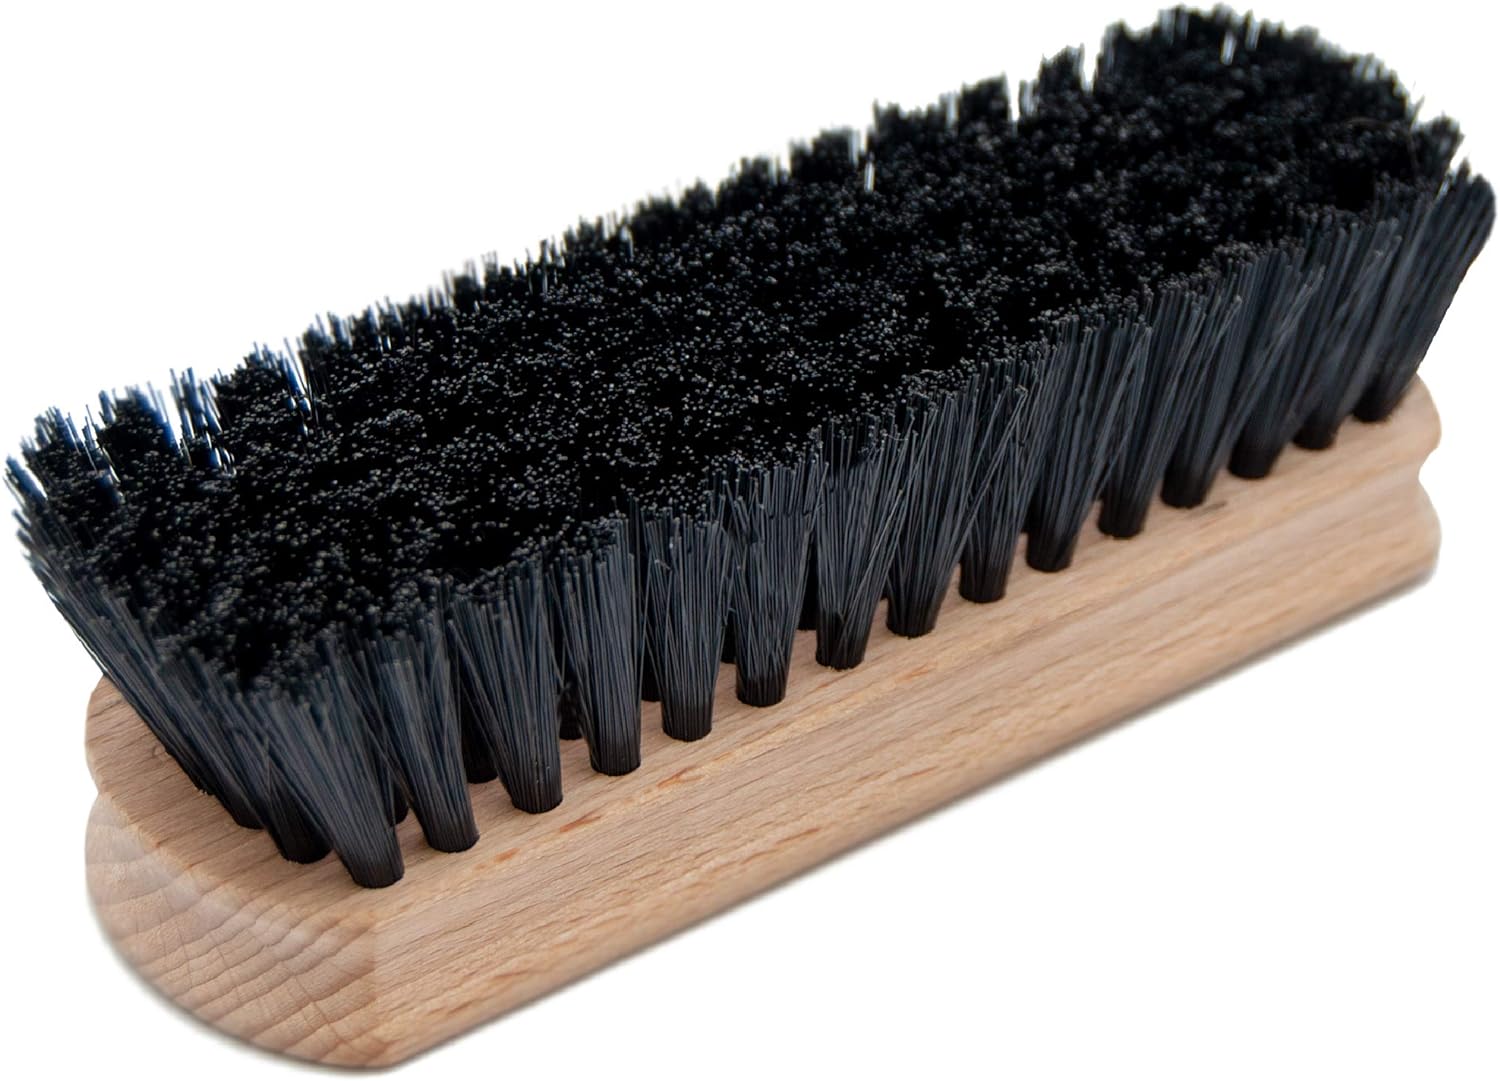 Boot Brush - Shoe and Boot Cleaner Brush, Shoe Brush With Comfortable Handle